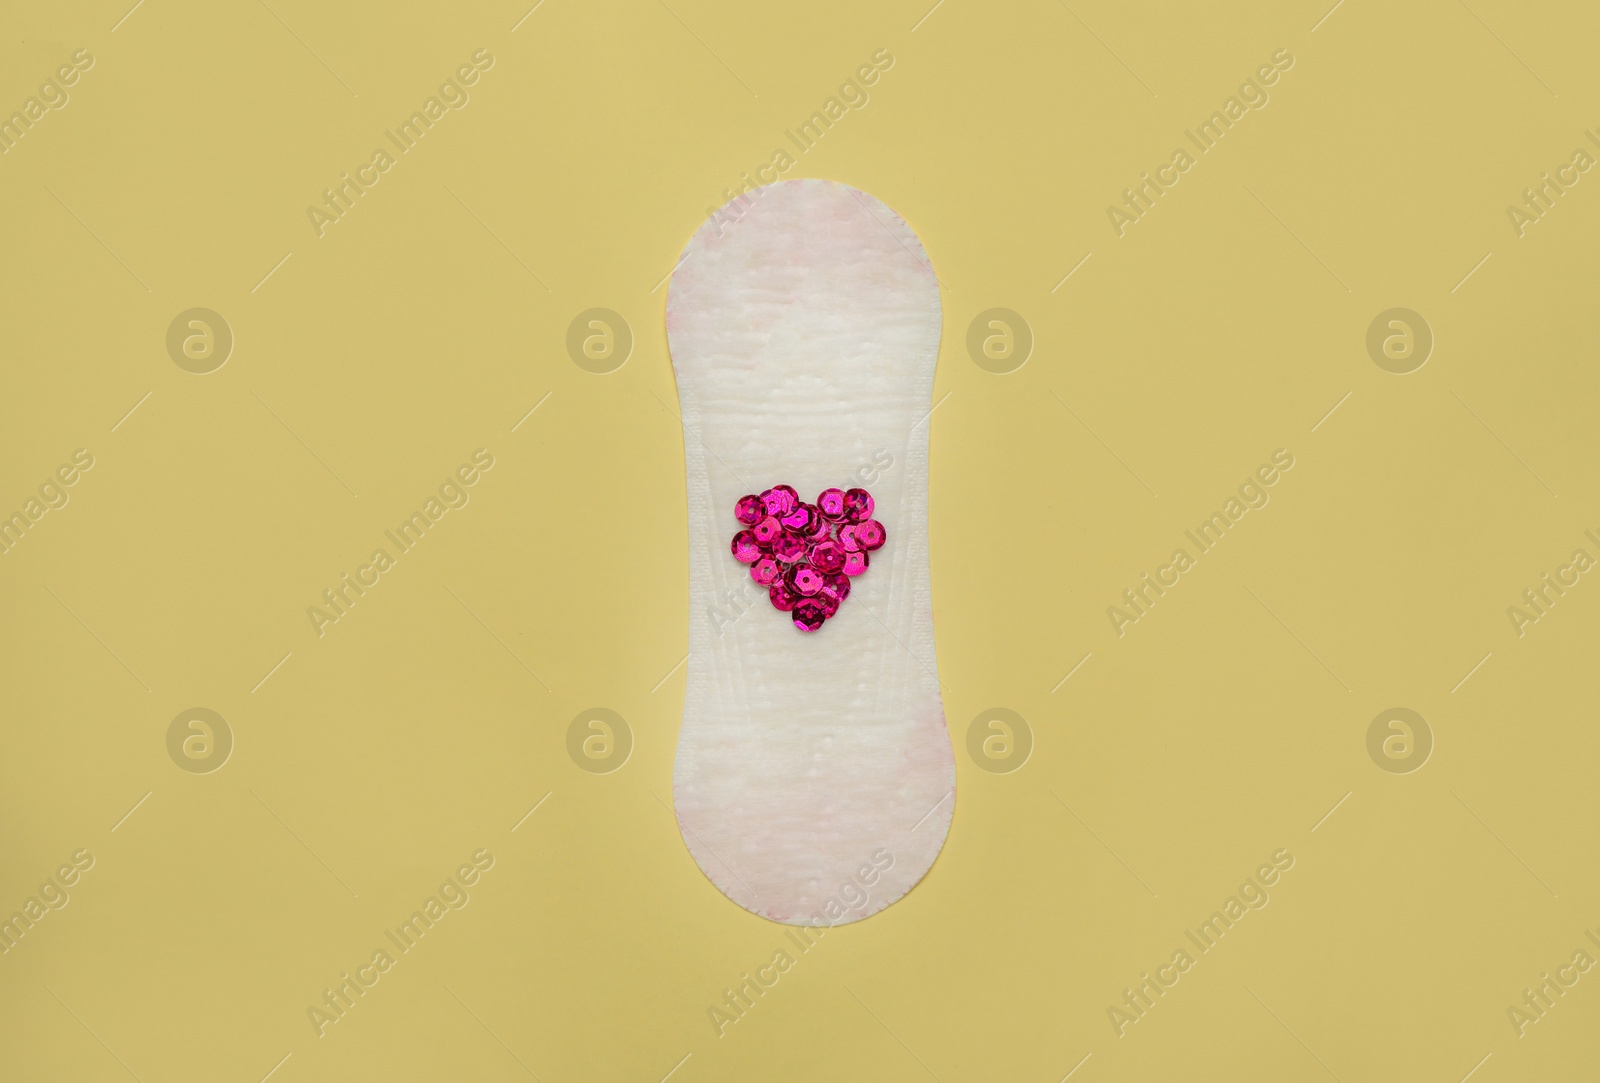 Photo of Sanitary pad with heart made of pink sequins on beige background, top view. Menstrual cycle